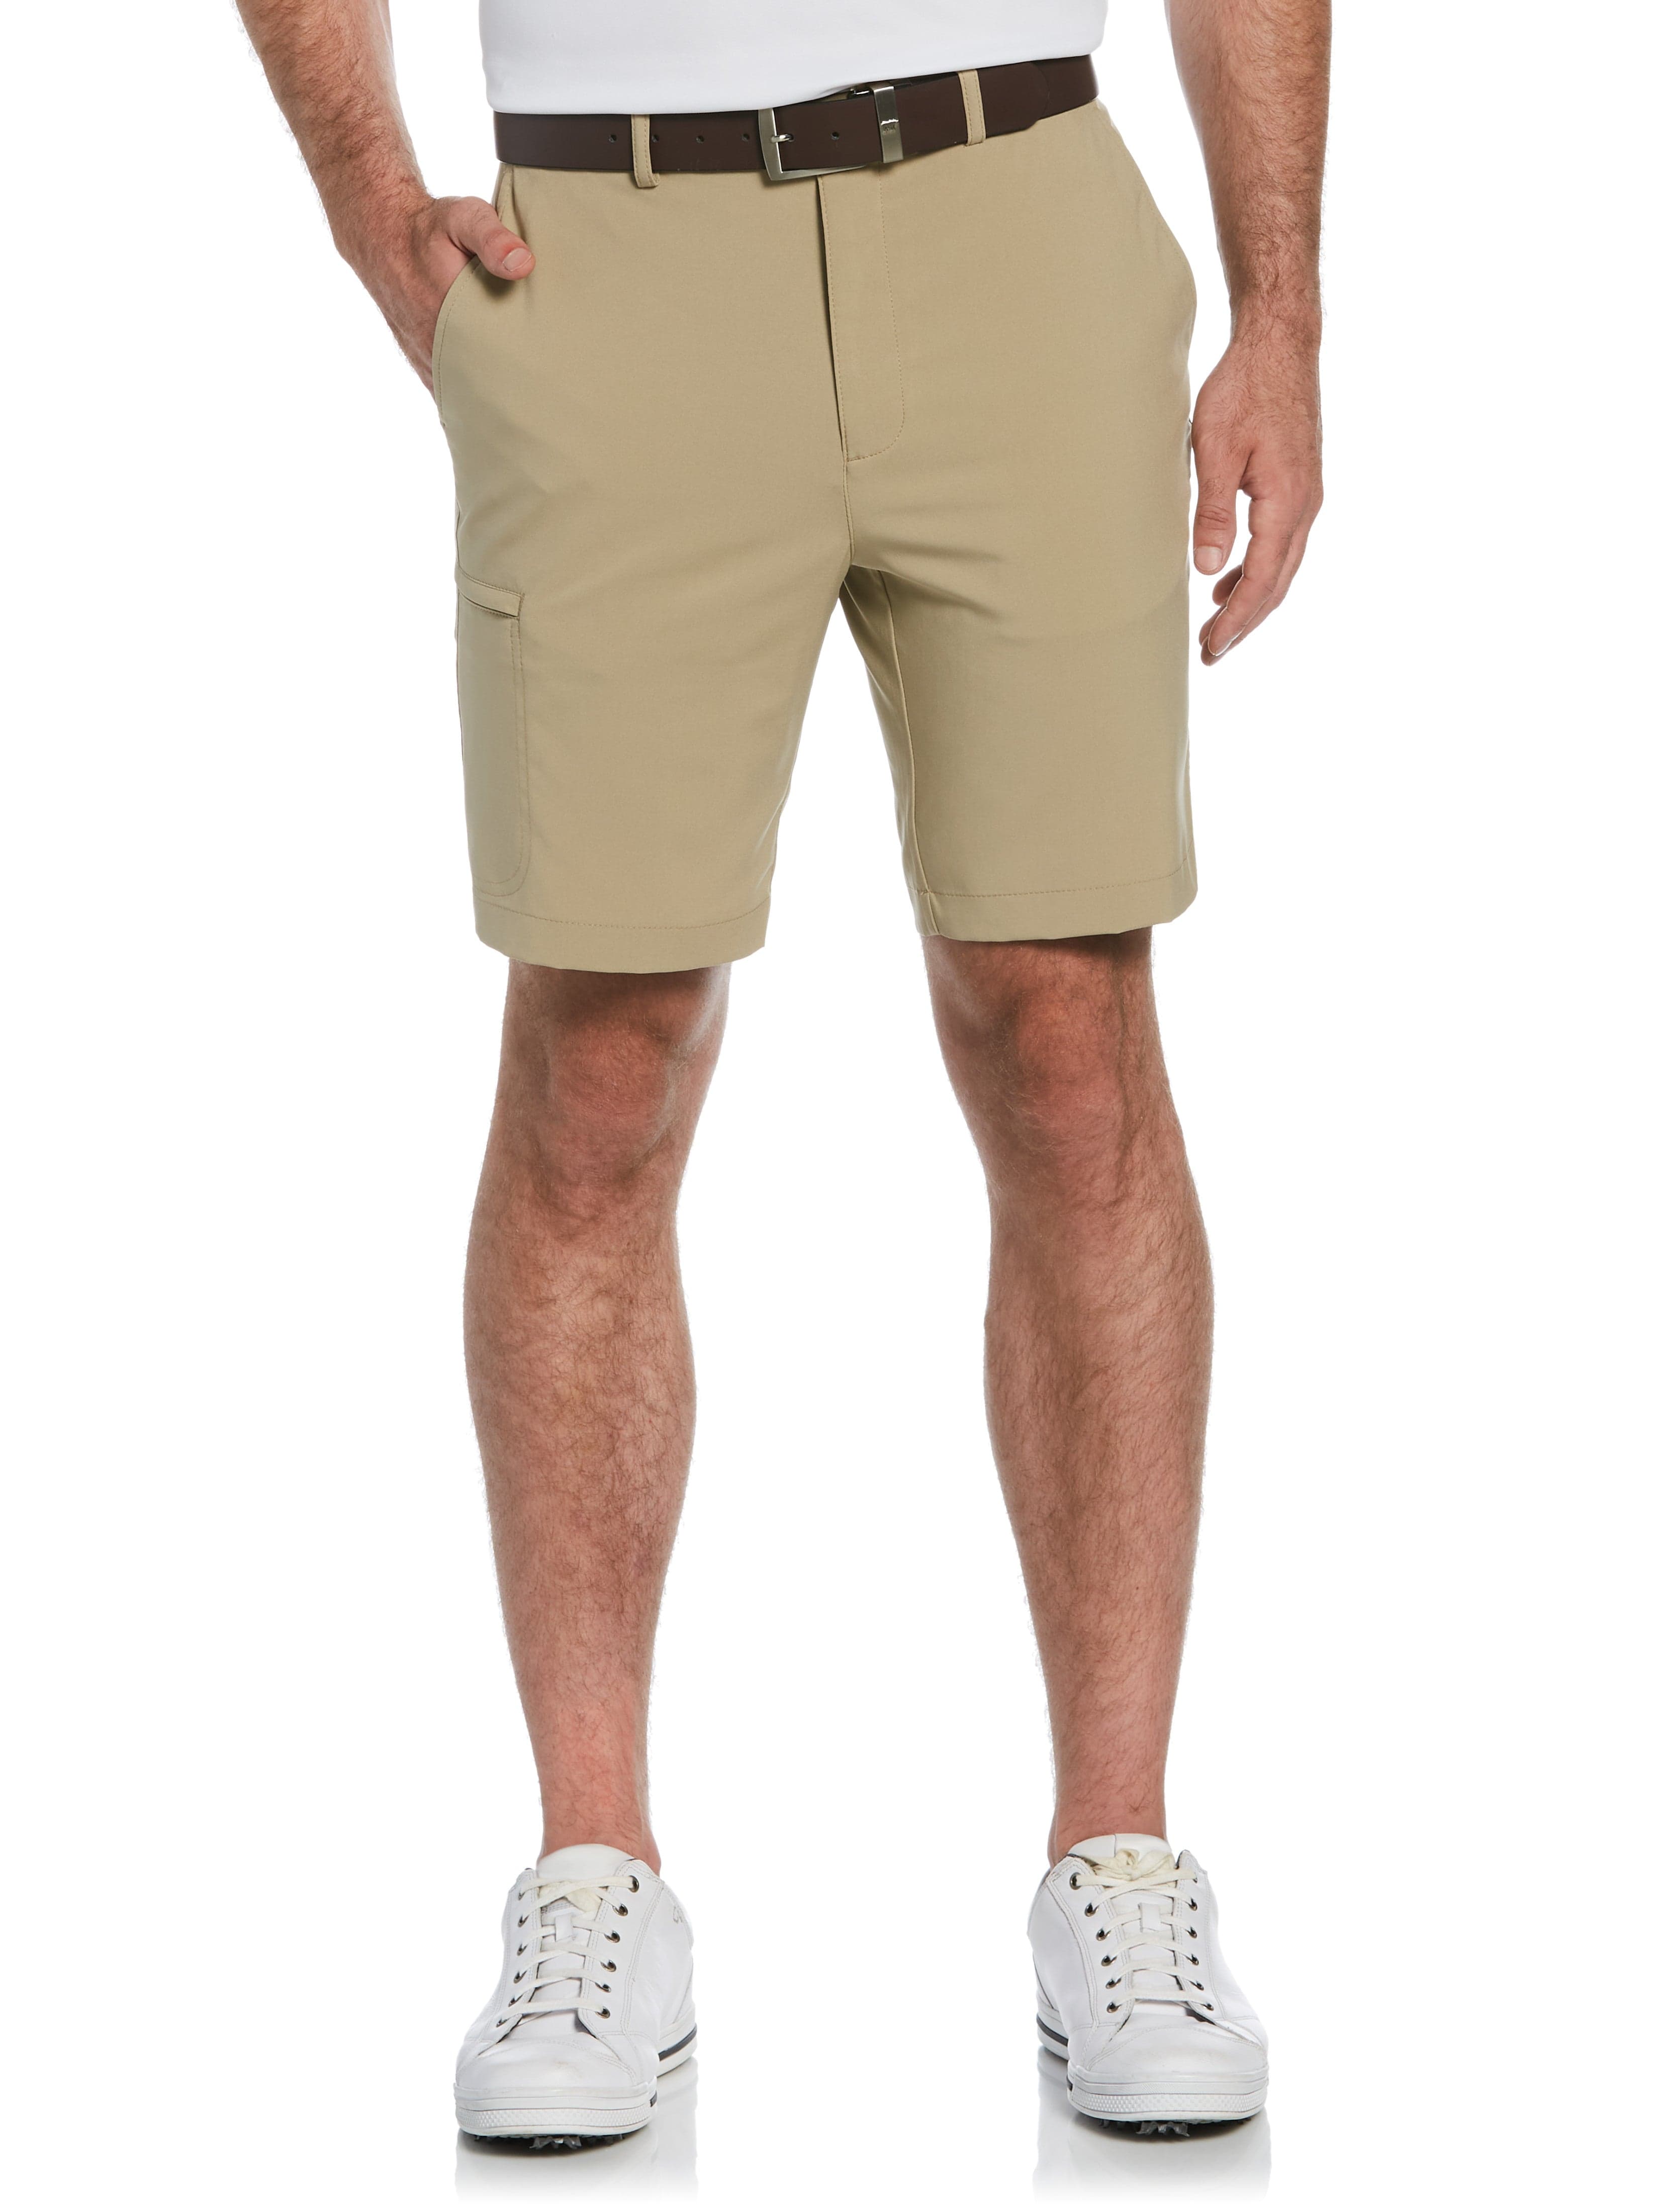 Jack Nicklaus Mens Flat Front Solid Golf Shorts w/ Cargo Pocket, Size 40, Chinchilla Beige, 100% Polyester | Golf Apparel Shop